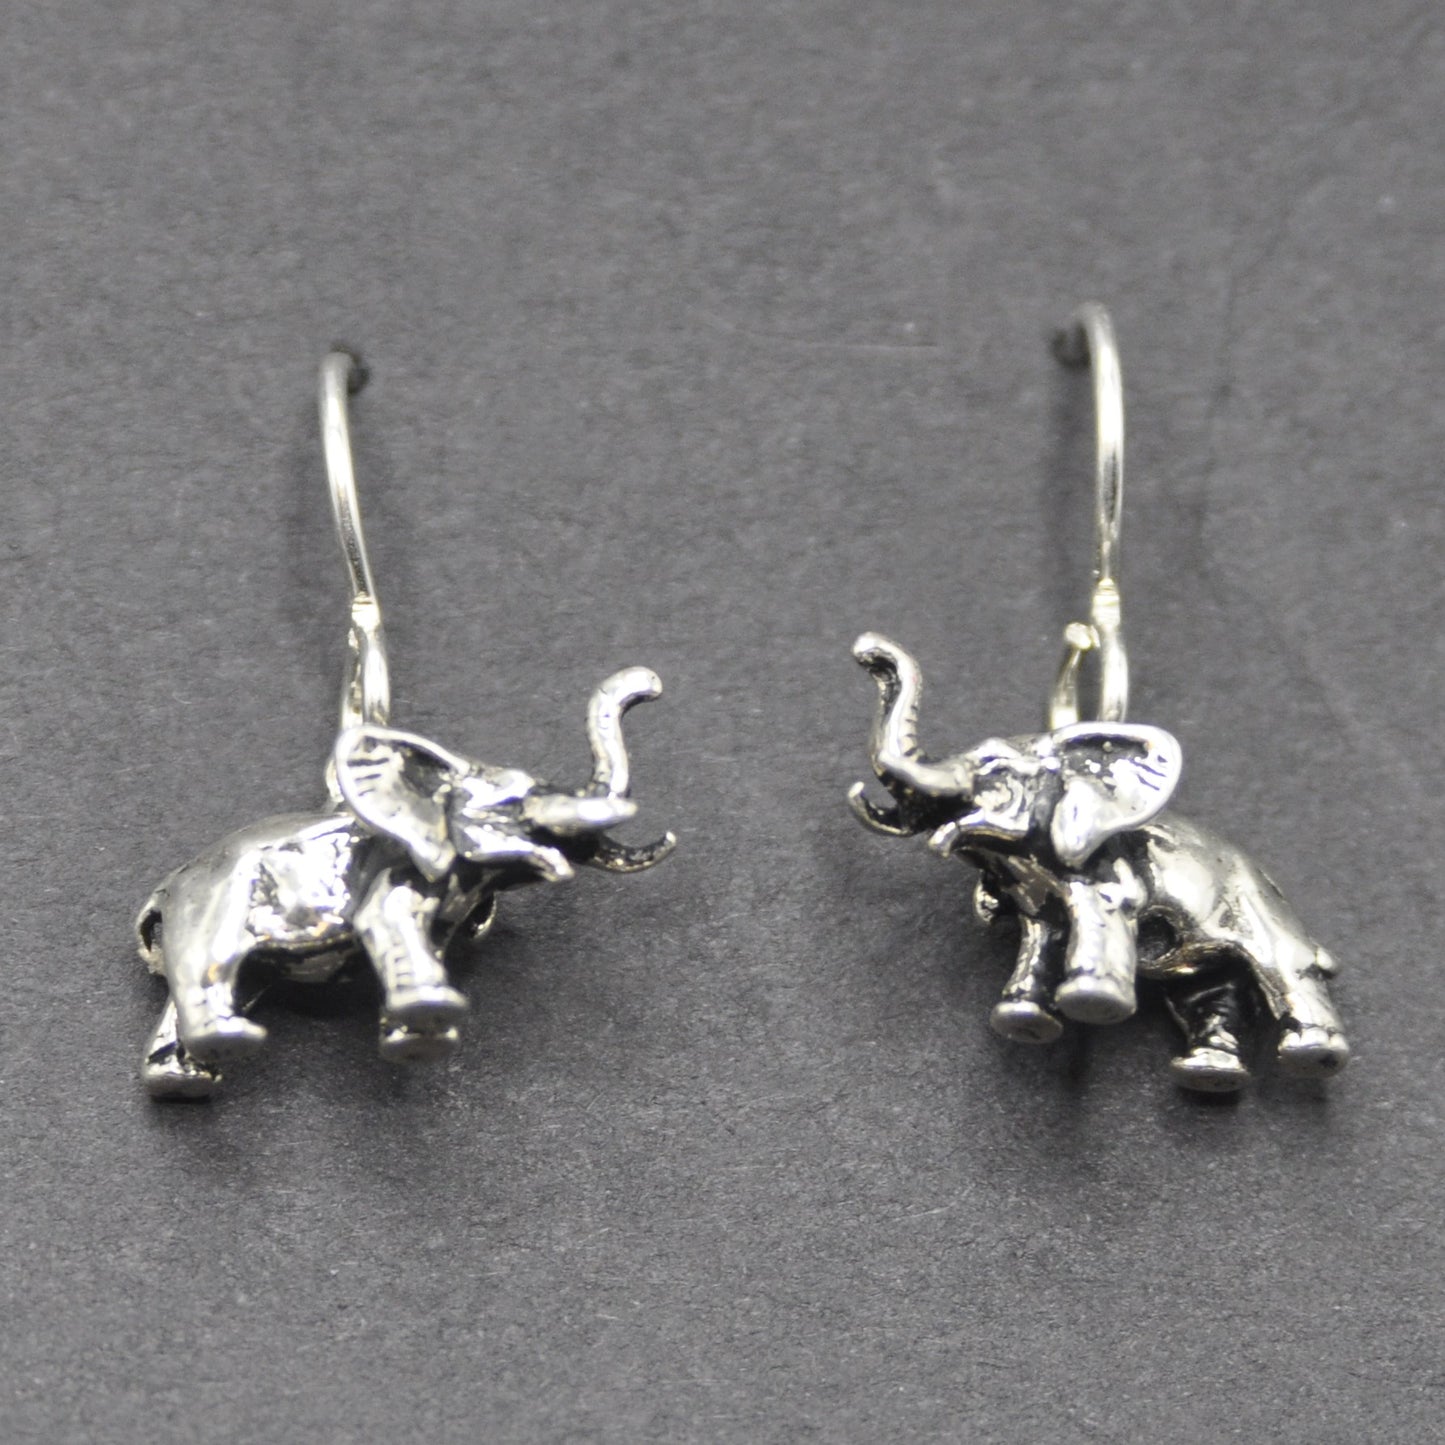 Elephant Earrings, Sterling Silver with sterling silver ear wires, Gift for Women, African Species, Intricately Detailed